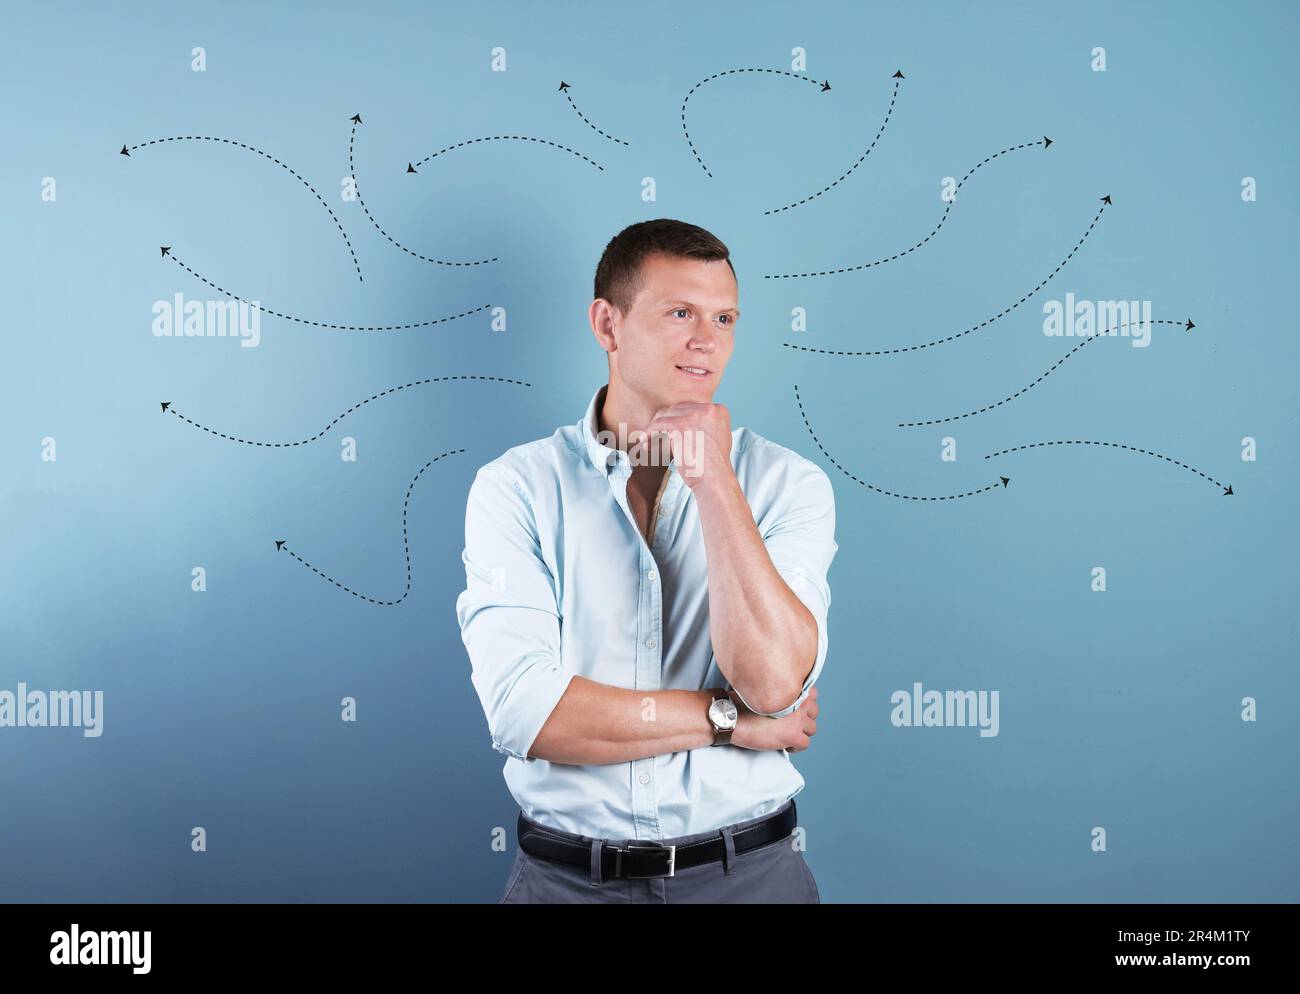 Choice in profession or other areas of life, concept. Making decision, thoughtful young man surrounded by drawn arrows on color background Stock Photo